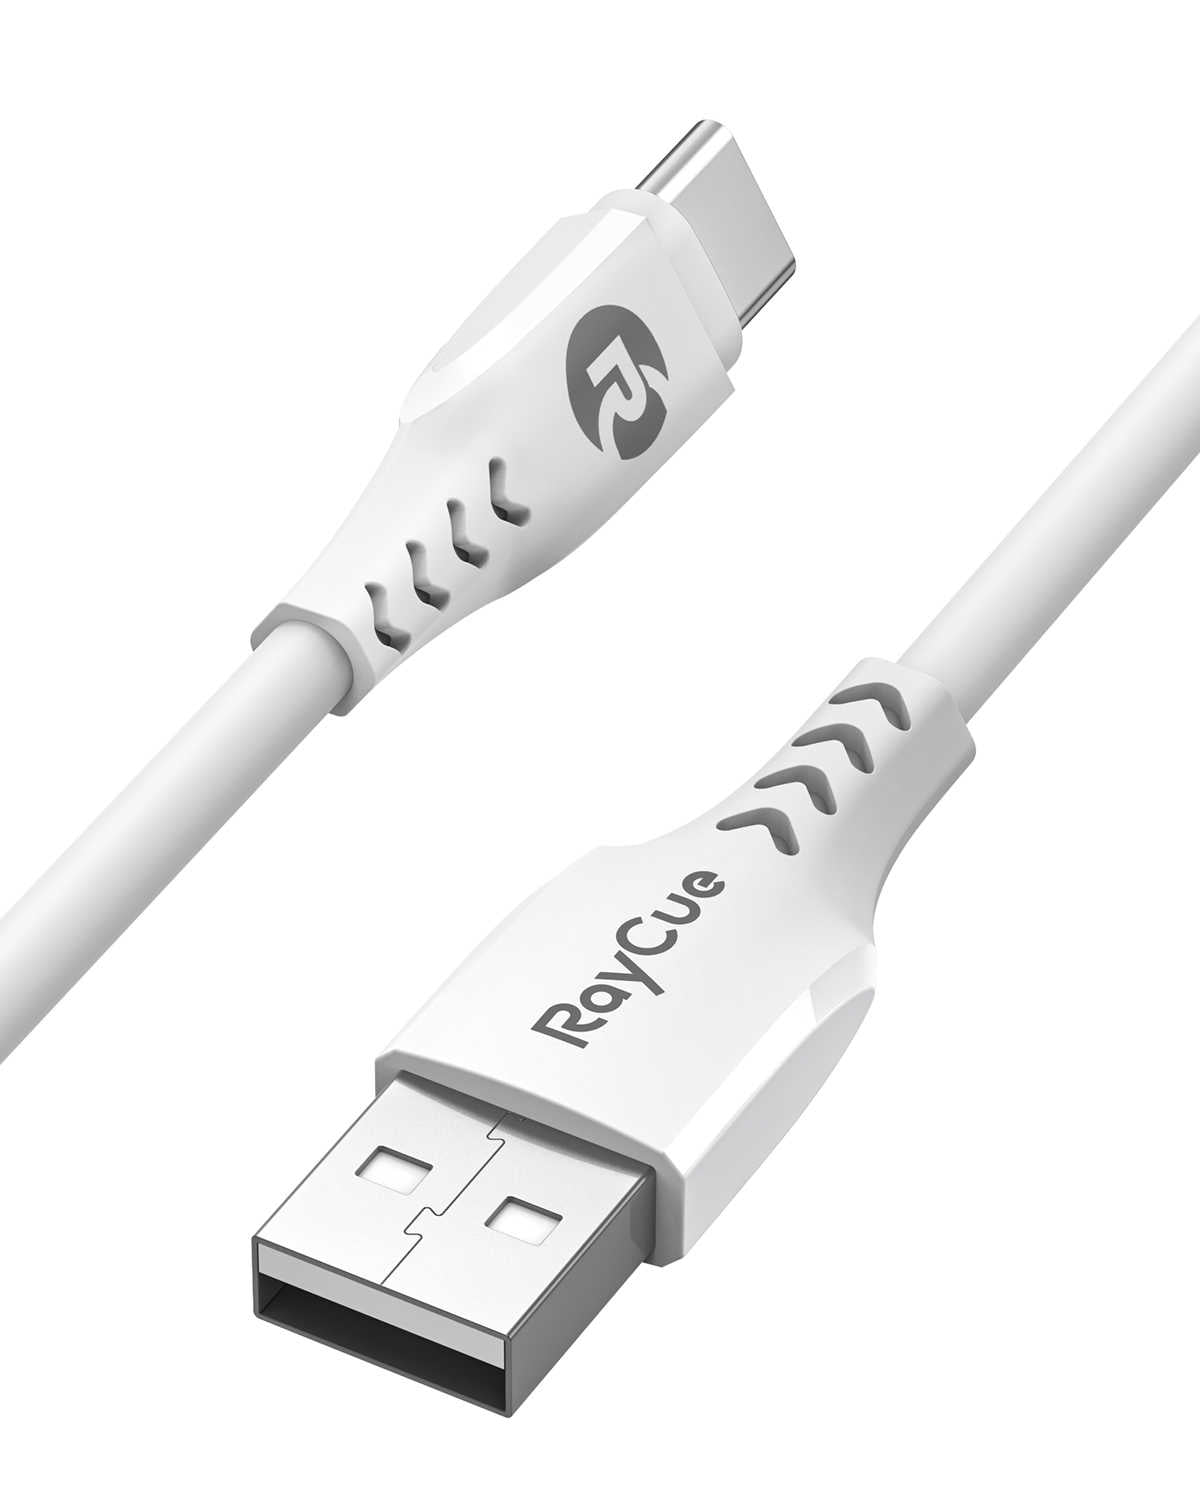 RayCue BlitzLink Flexo 1.2M PVC USB-A to C Cable for Smartphones and Tablets